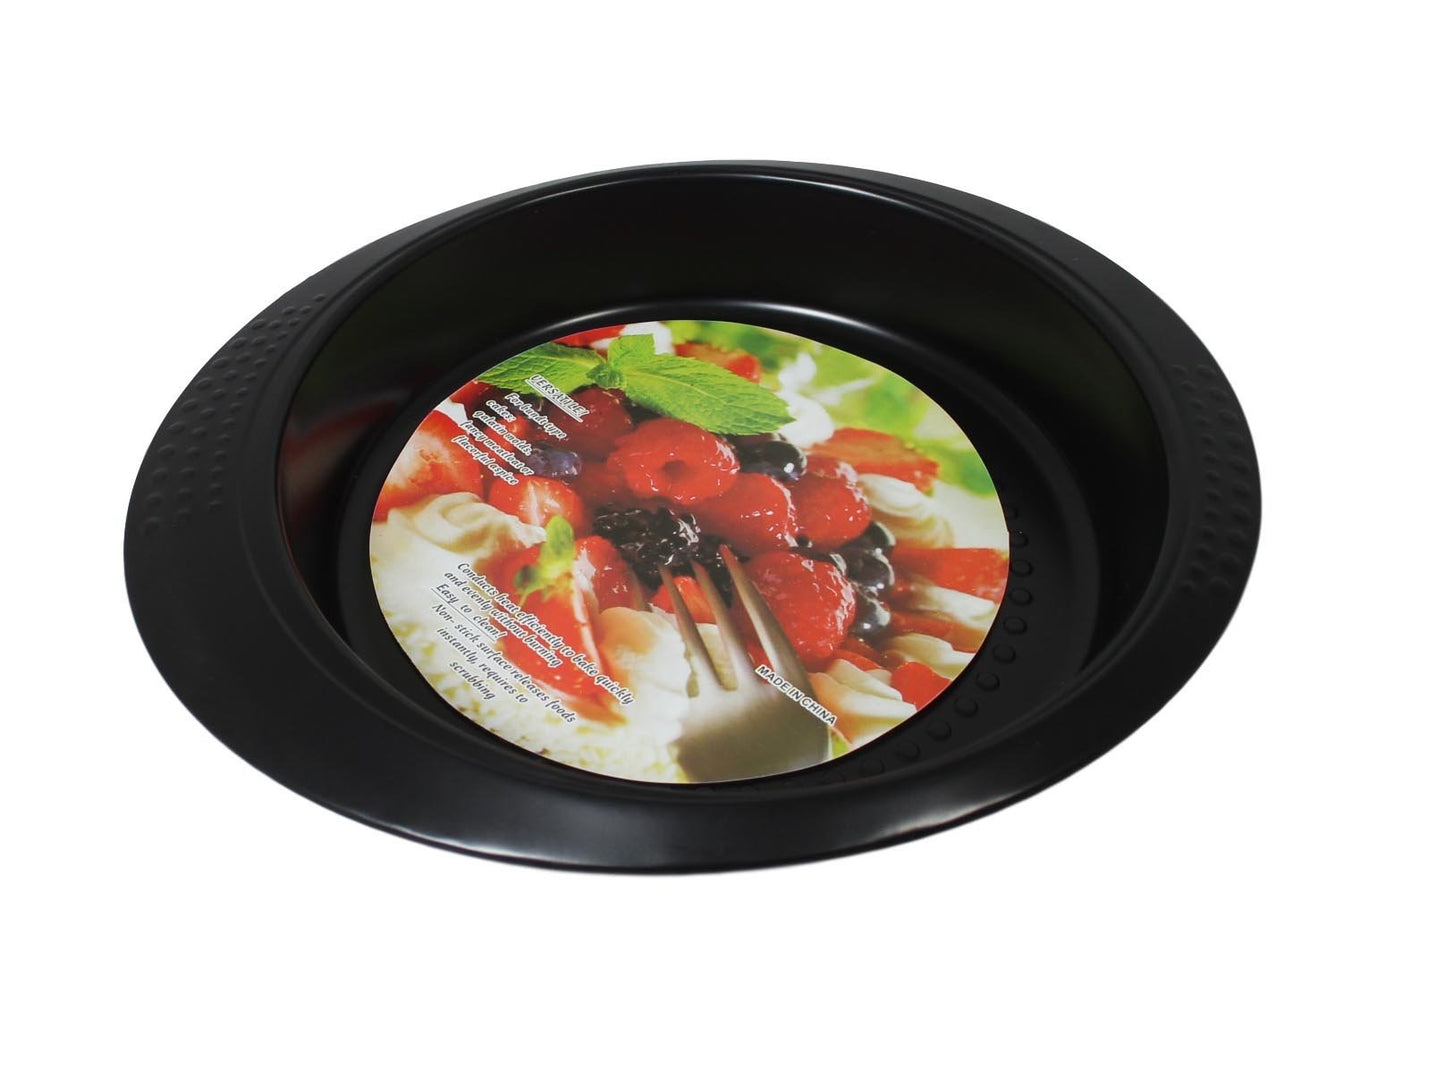 Household Baking Tray Black Dotted Air Non Stick Surface Round Tray 26cm 5561 (Parcel Rate)